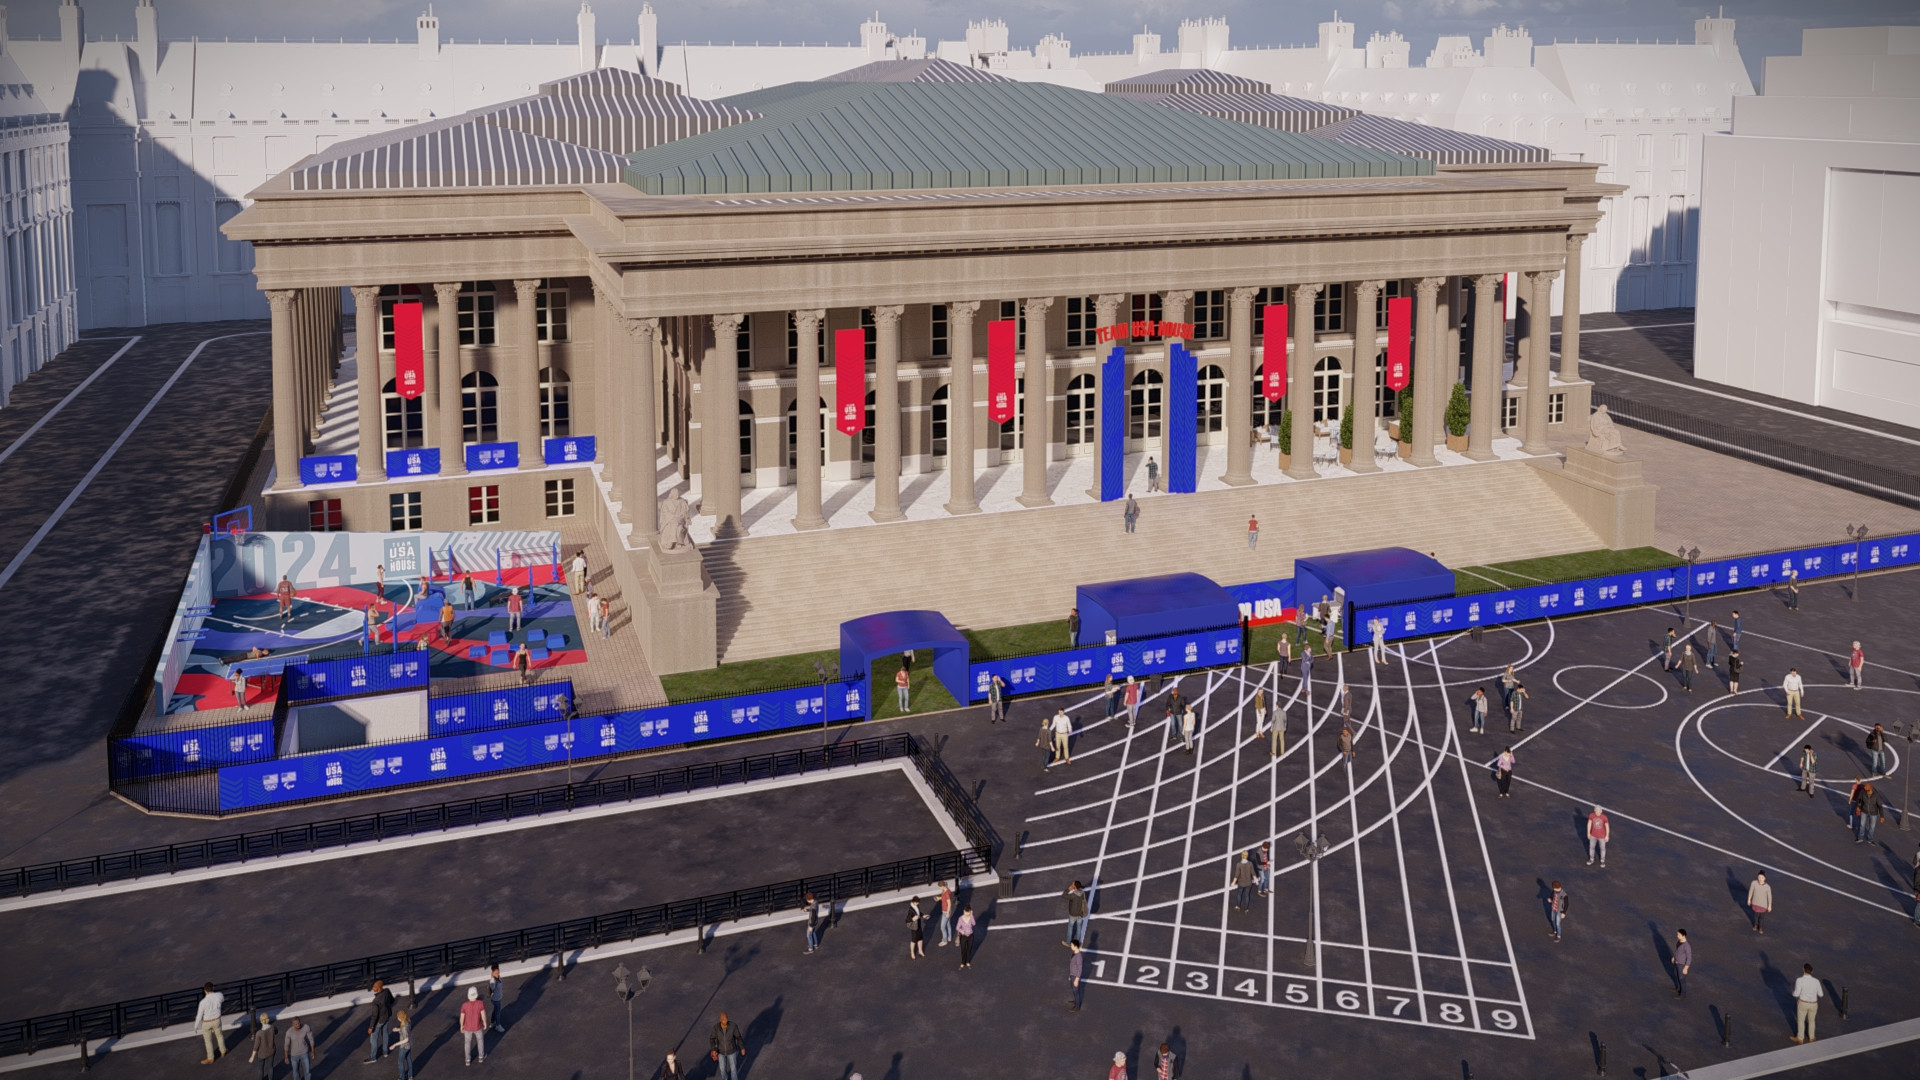 Team USA House is set to be located at the Palais Brongniart during Paris 2024 ©USOPC